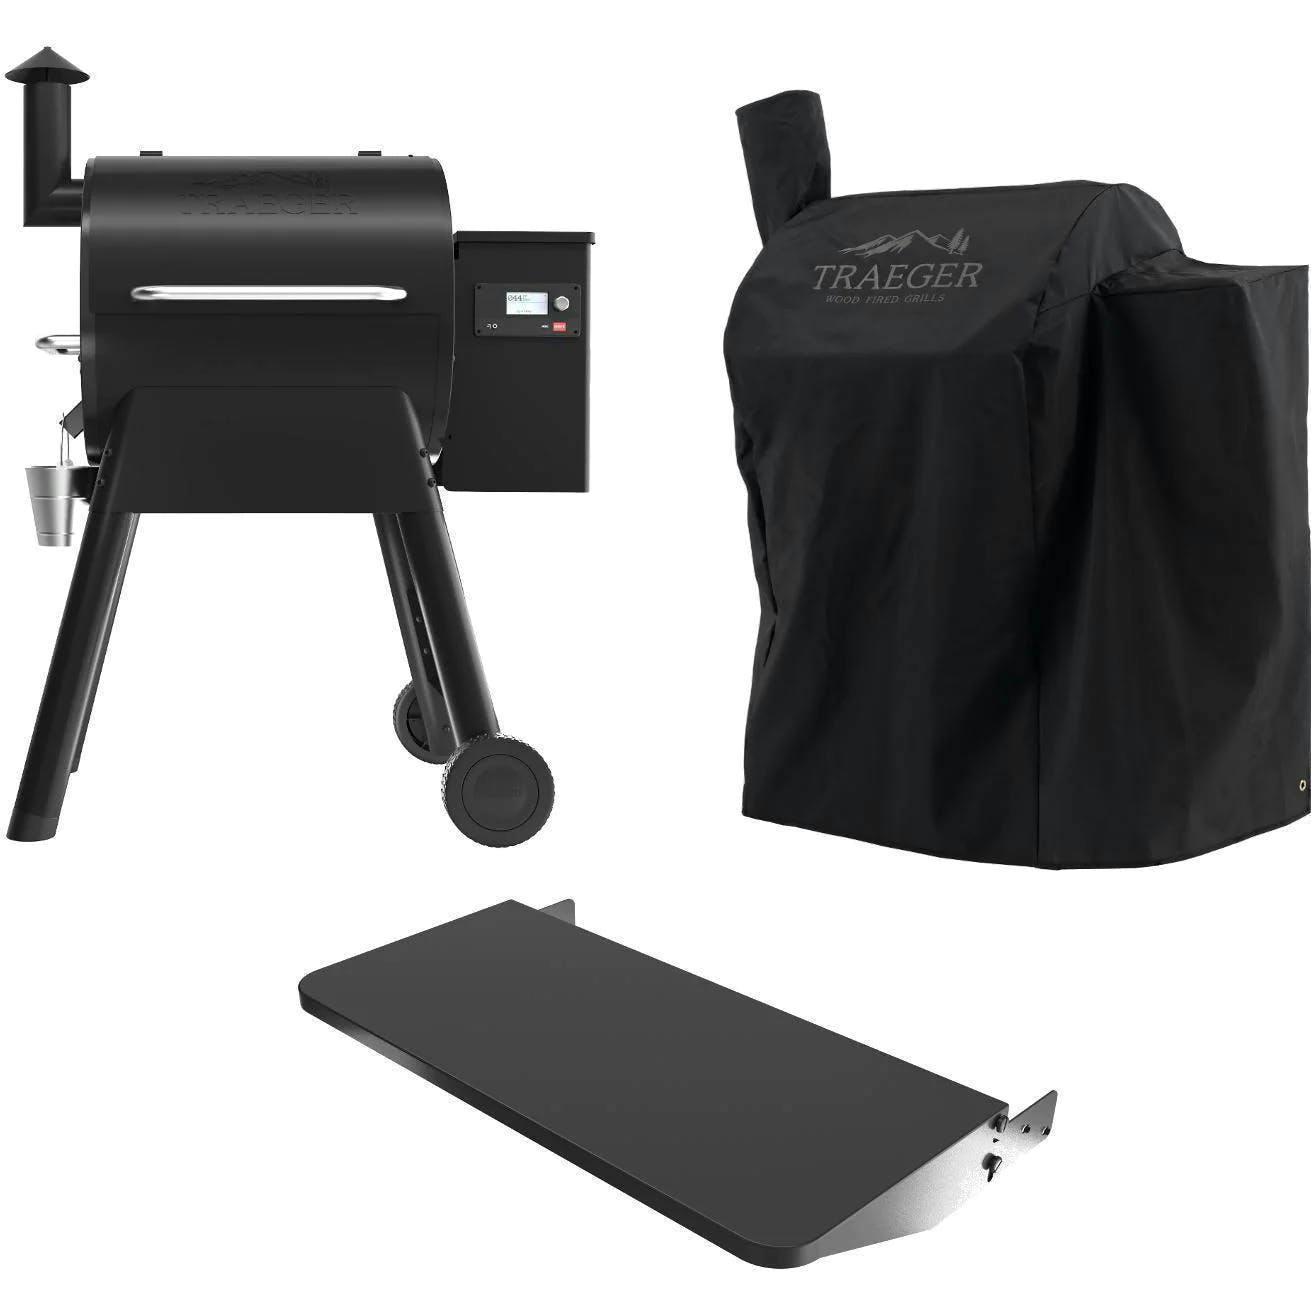 Traeger Pro Wi-Fi Controlled Wood Pellet Grill With WiFIRE, Front Shelf & Grill Cover